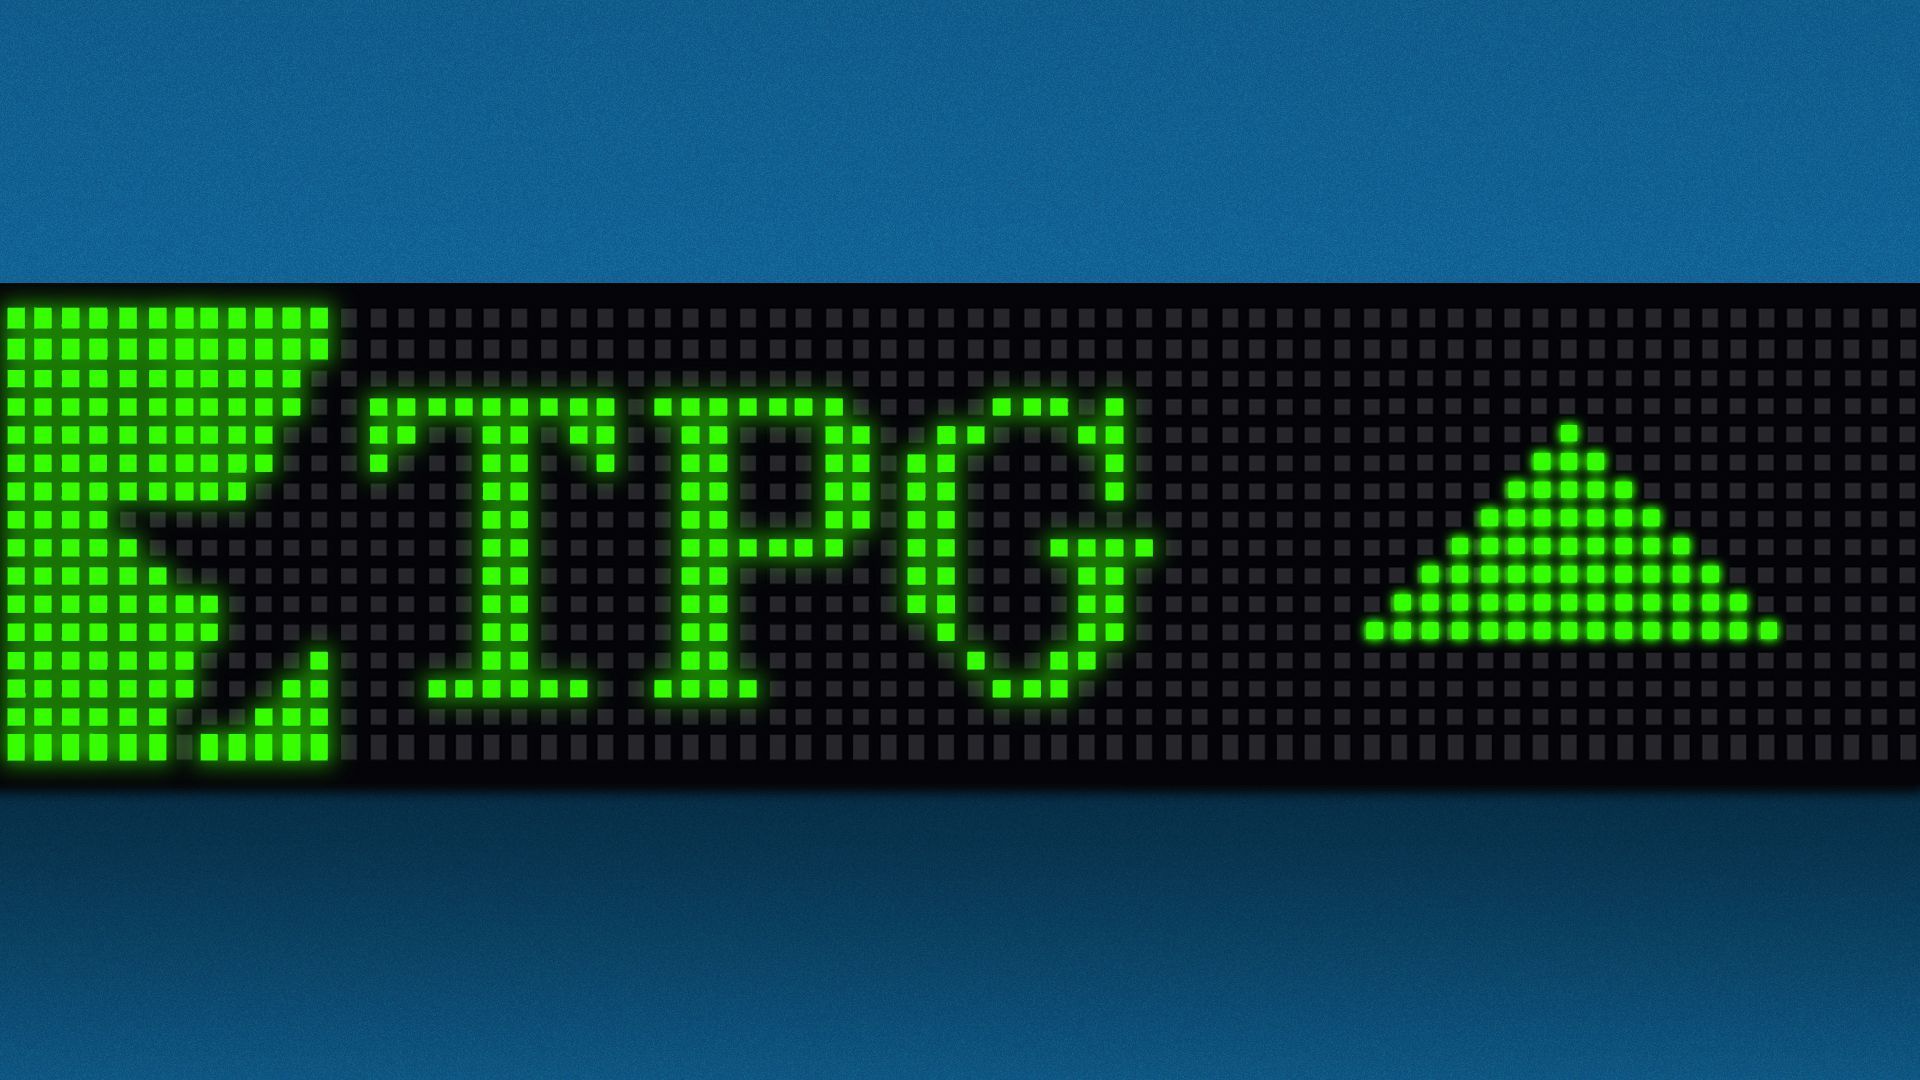 Illustration of a stock ticker with LED lights forming the TPG logo and an upward pointing arrow